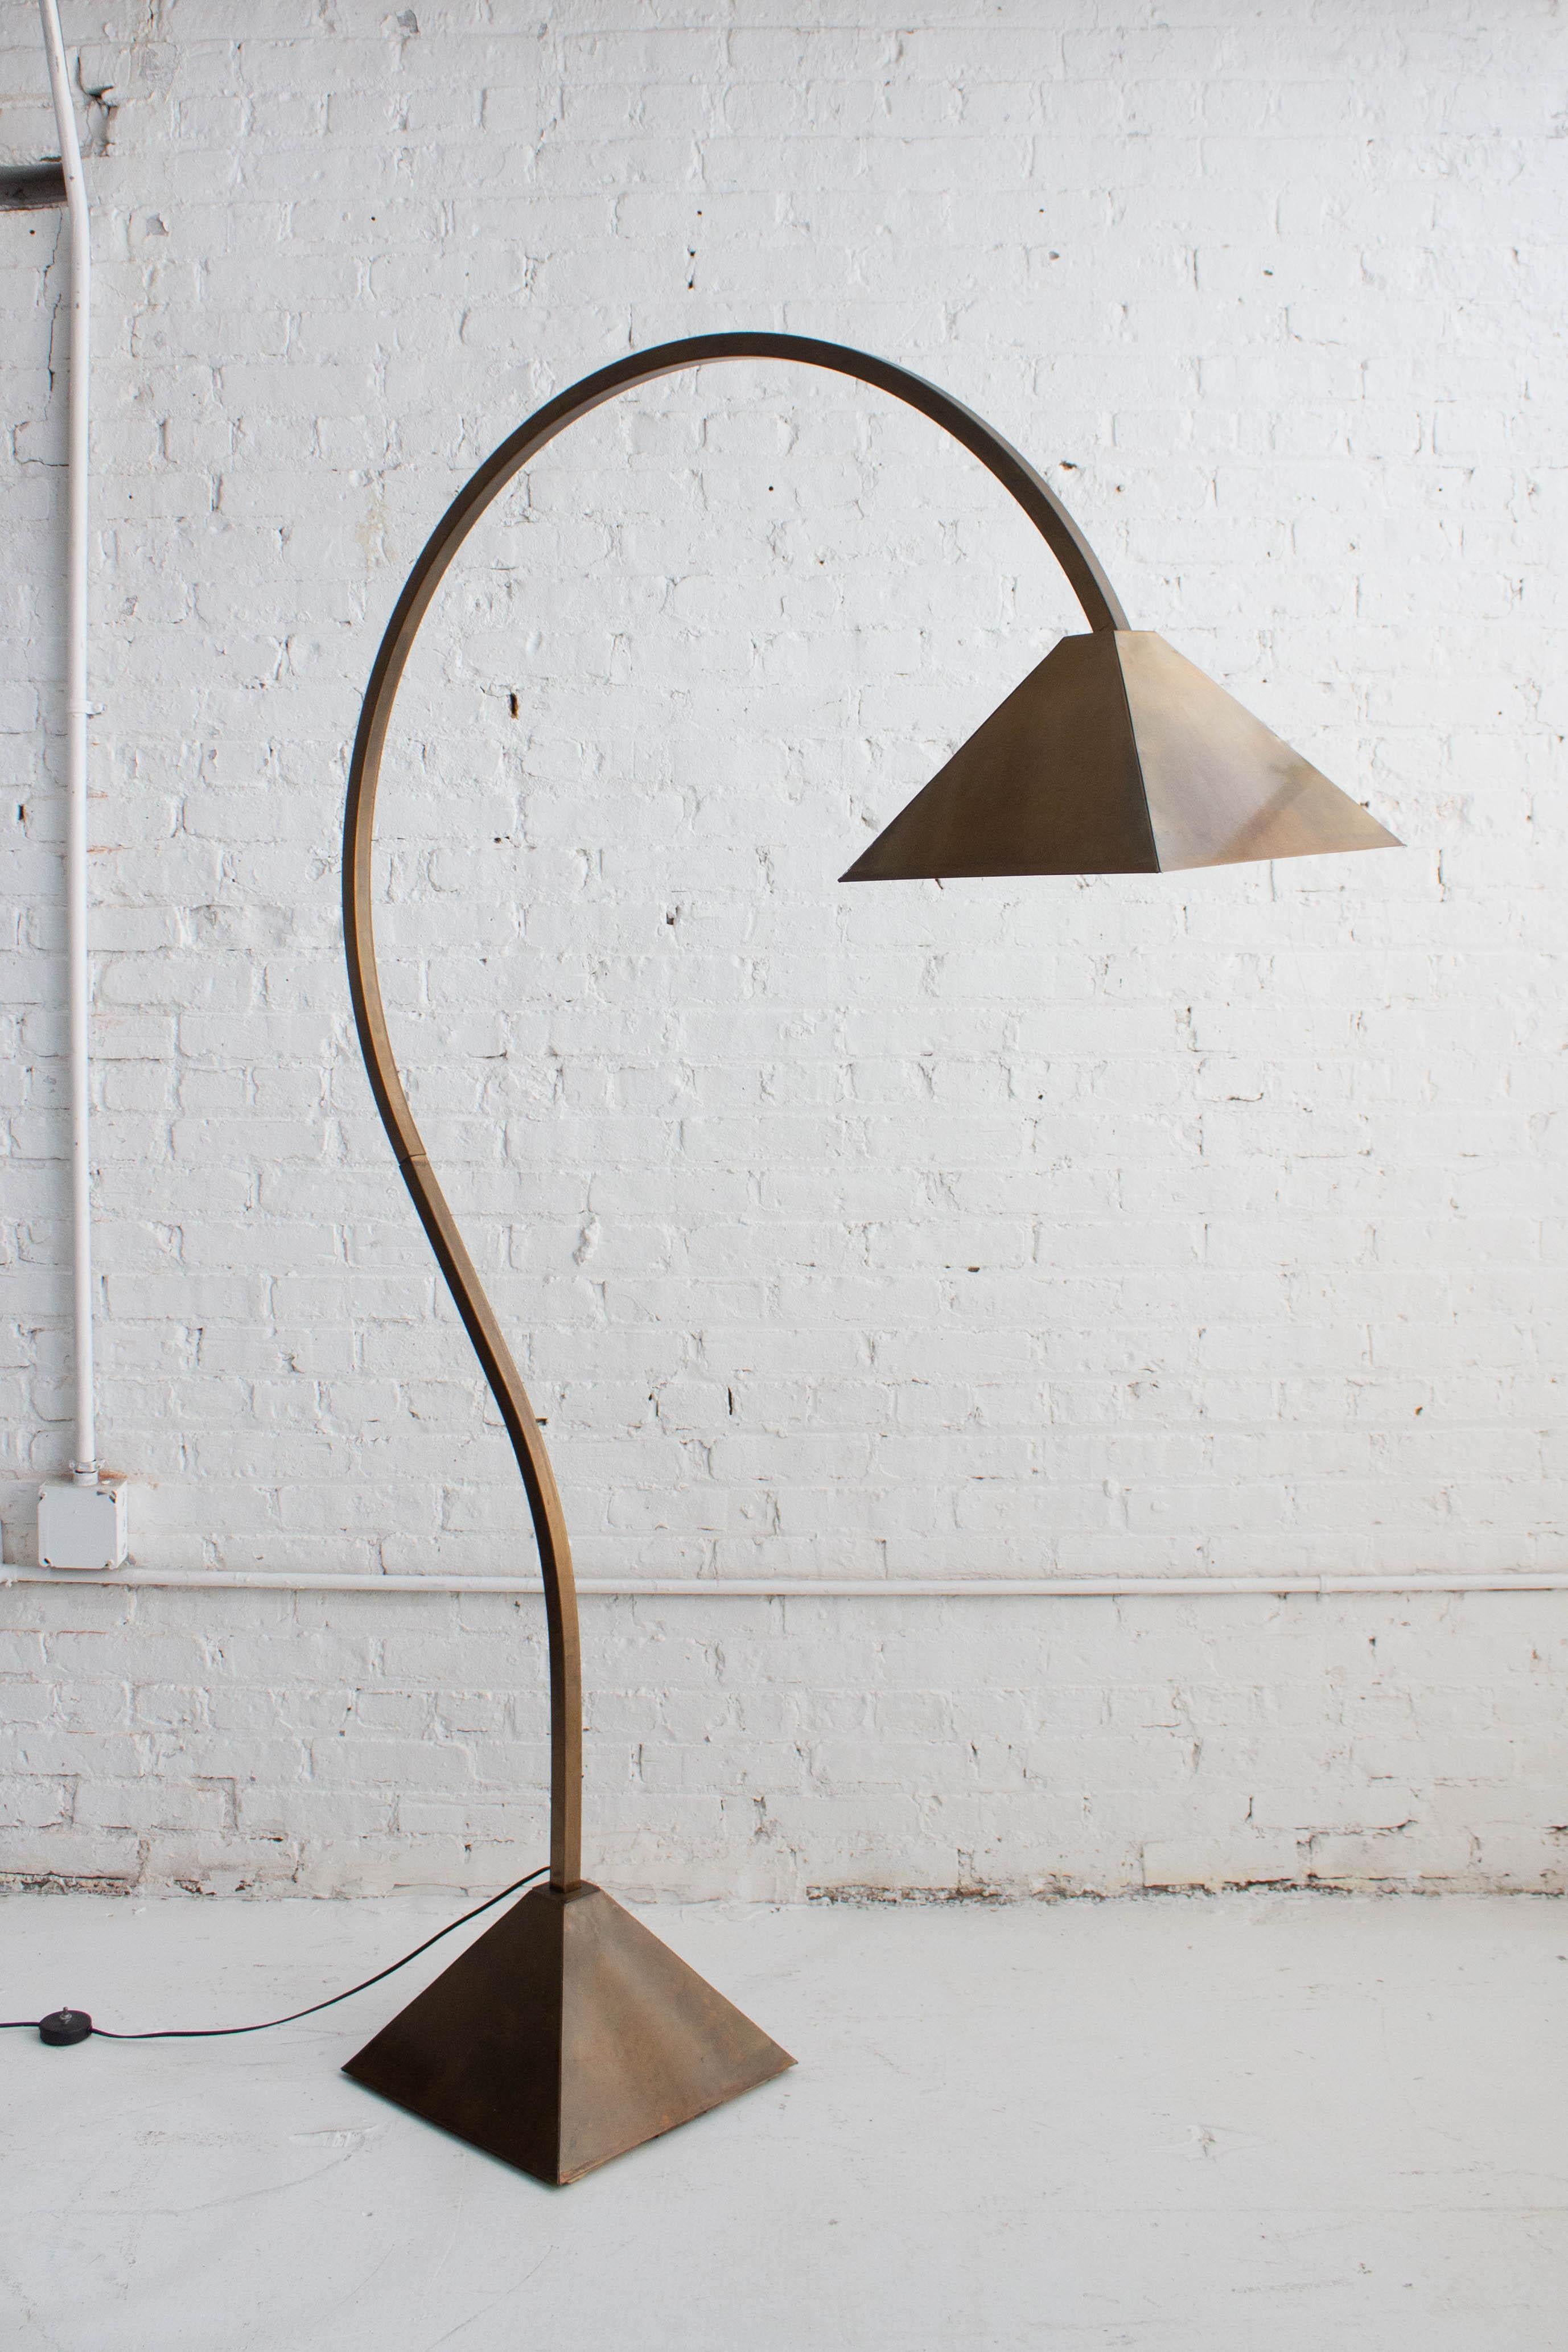 American Studio Made Burnished Brass Arc Floor Lamp For Sale